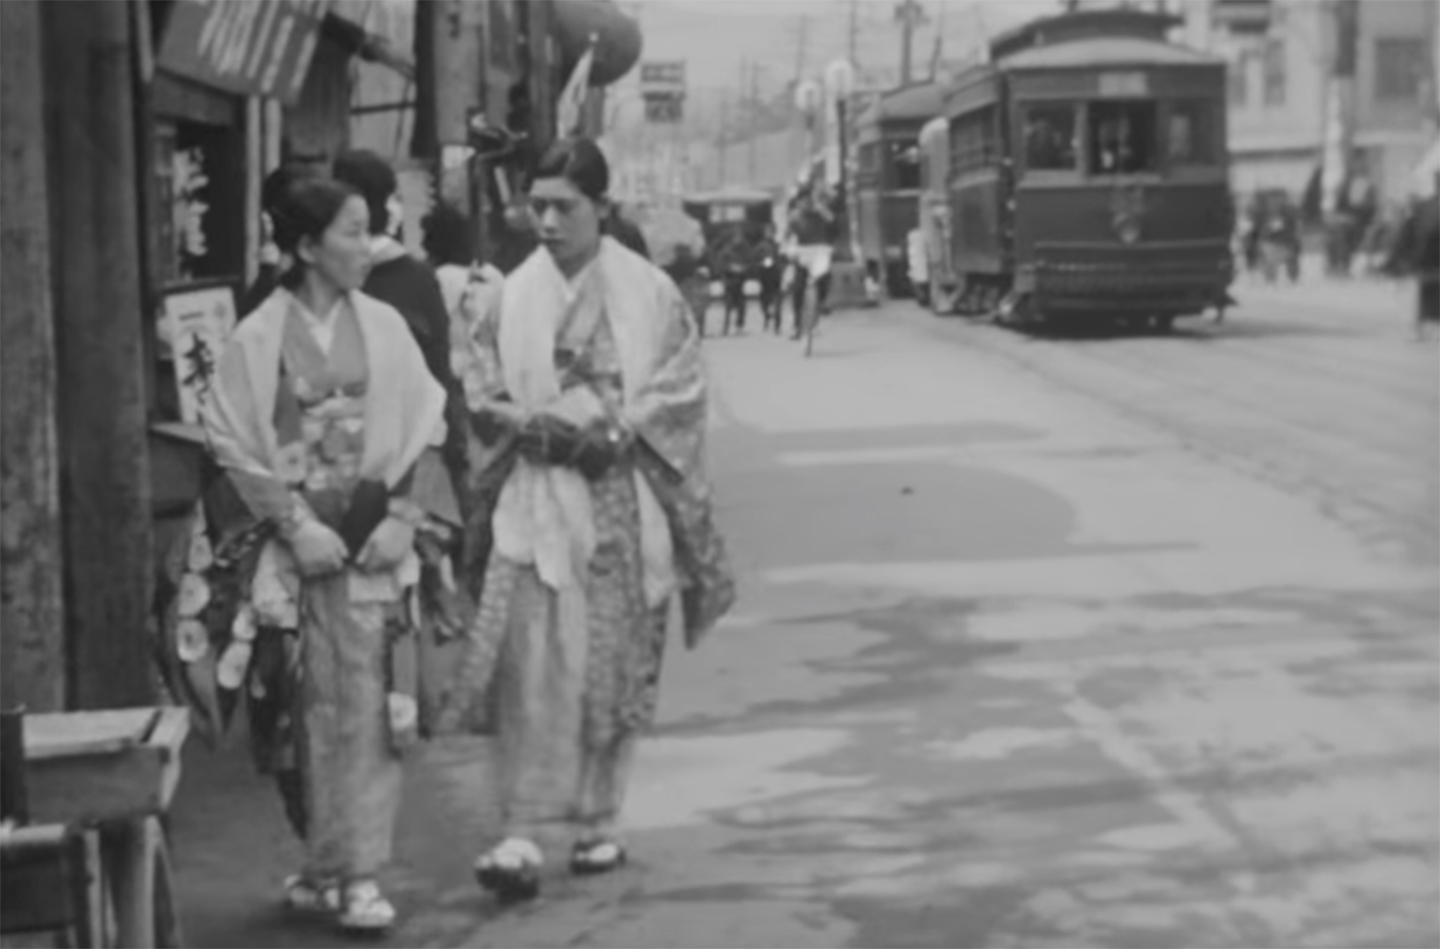 Rare footage shows idyllic life in Hiroshima before an atomic bomb was dropped on the city. (YouTube)